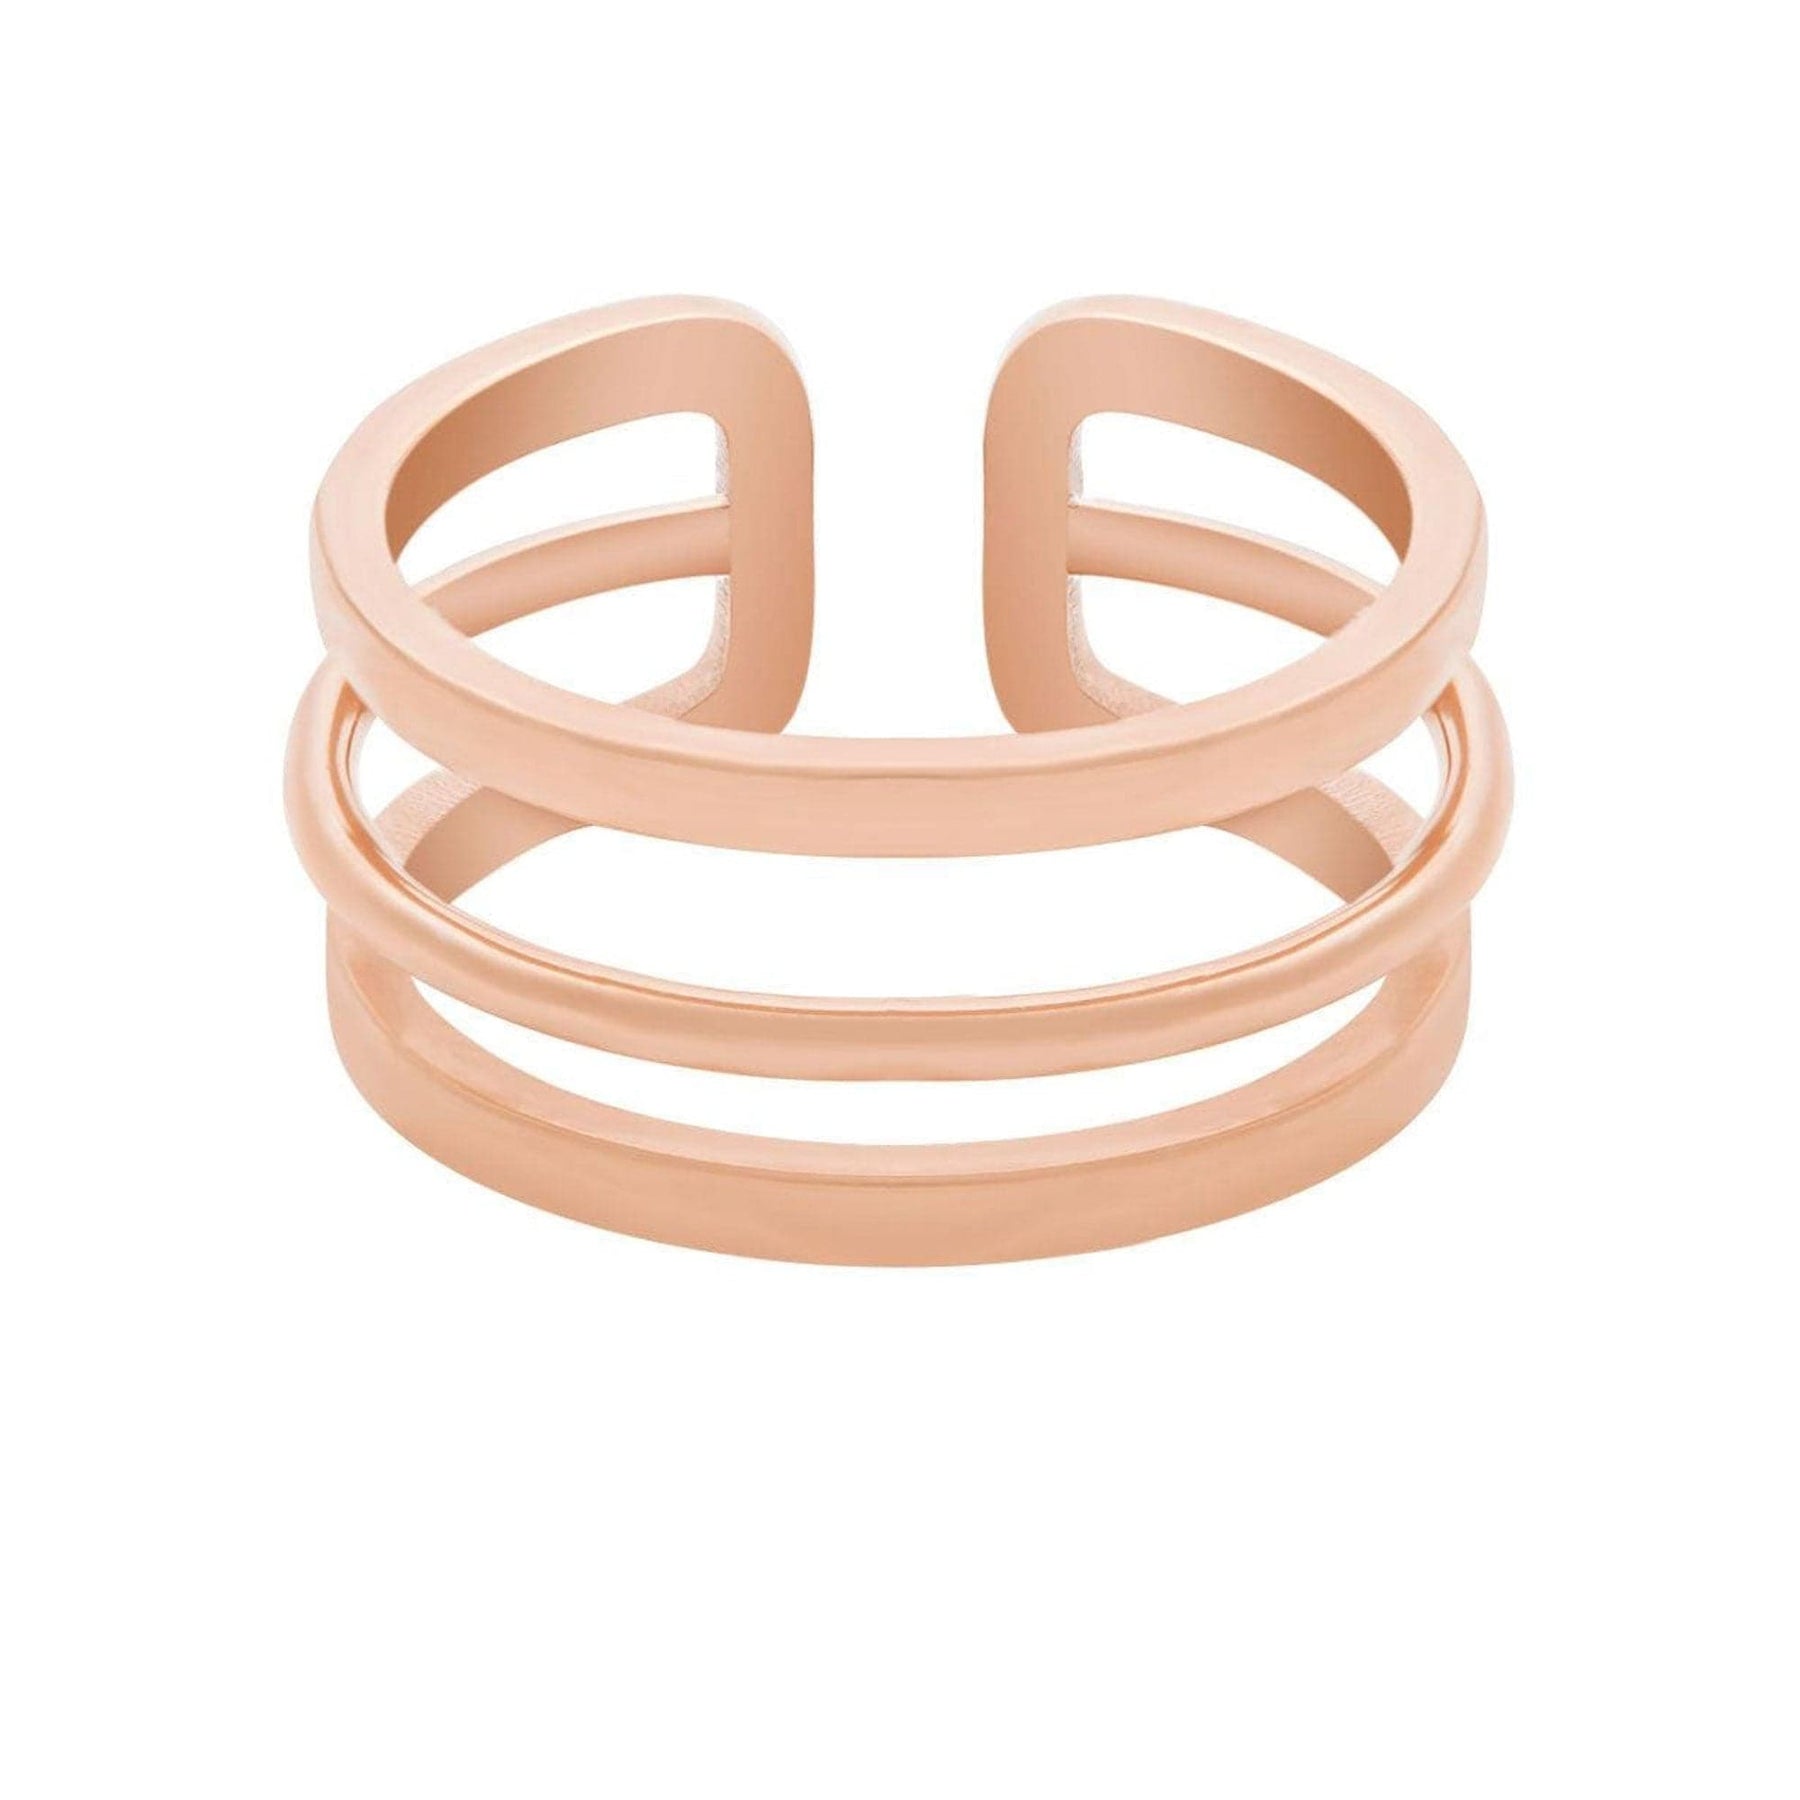 BohoMoon Stainless Steel Izzy Ring Rose Gold / US 6 / UK L / EUR 51 (small)